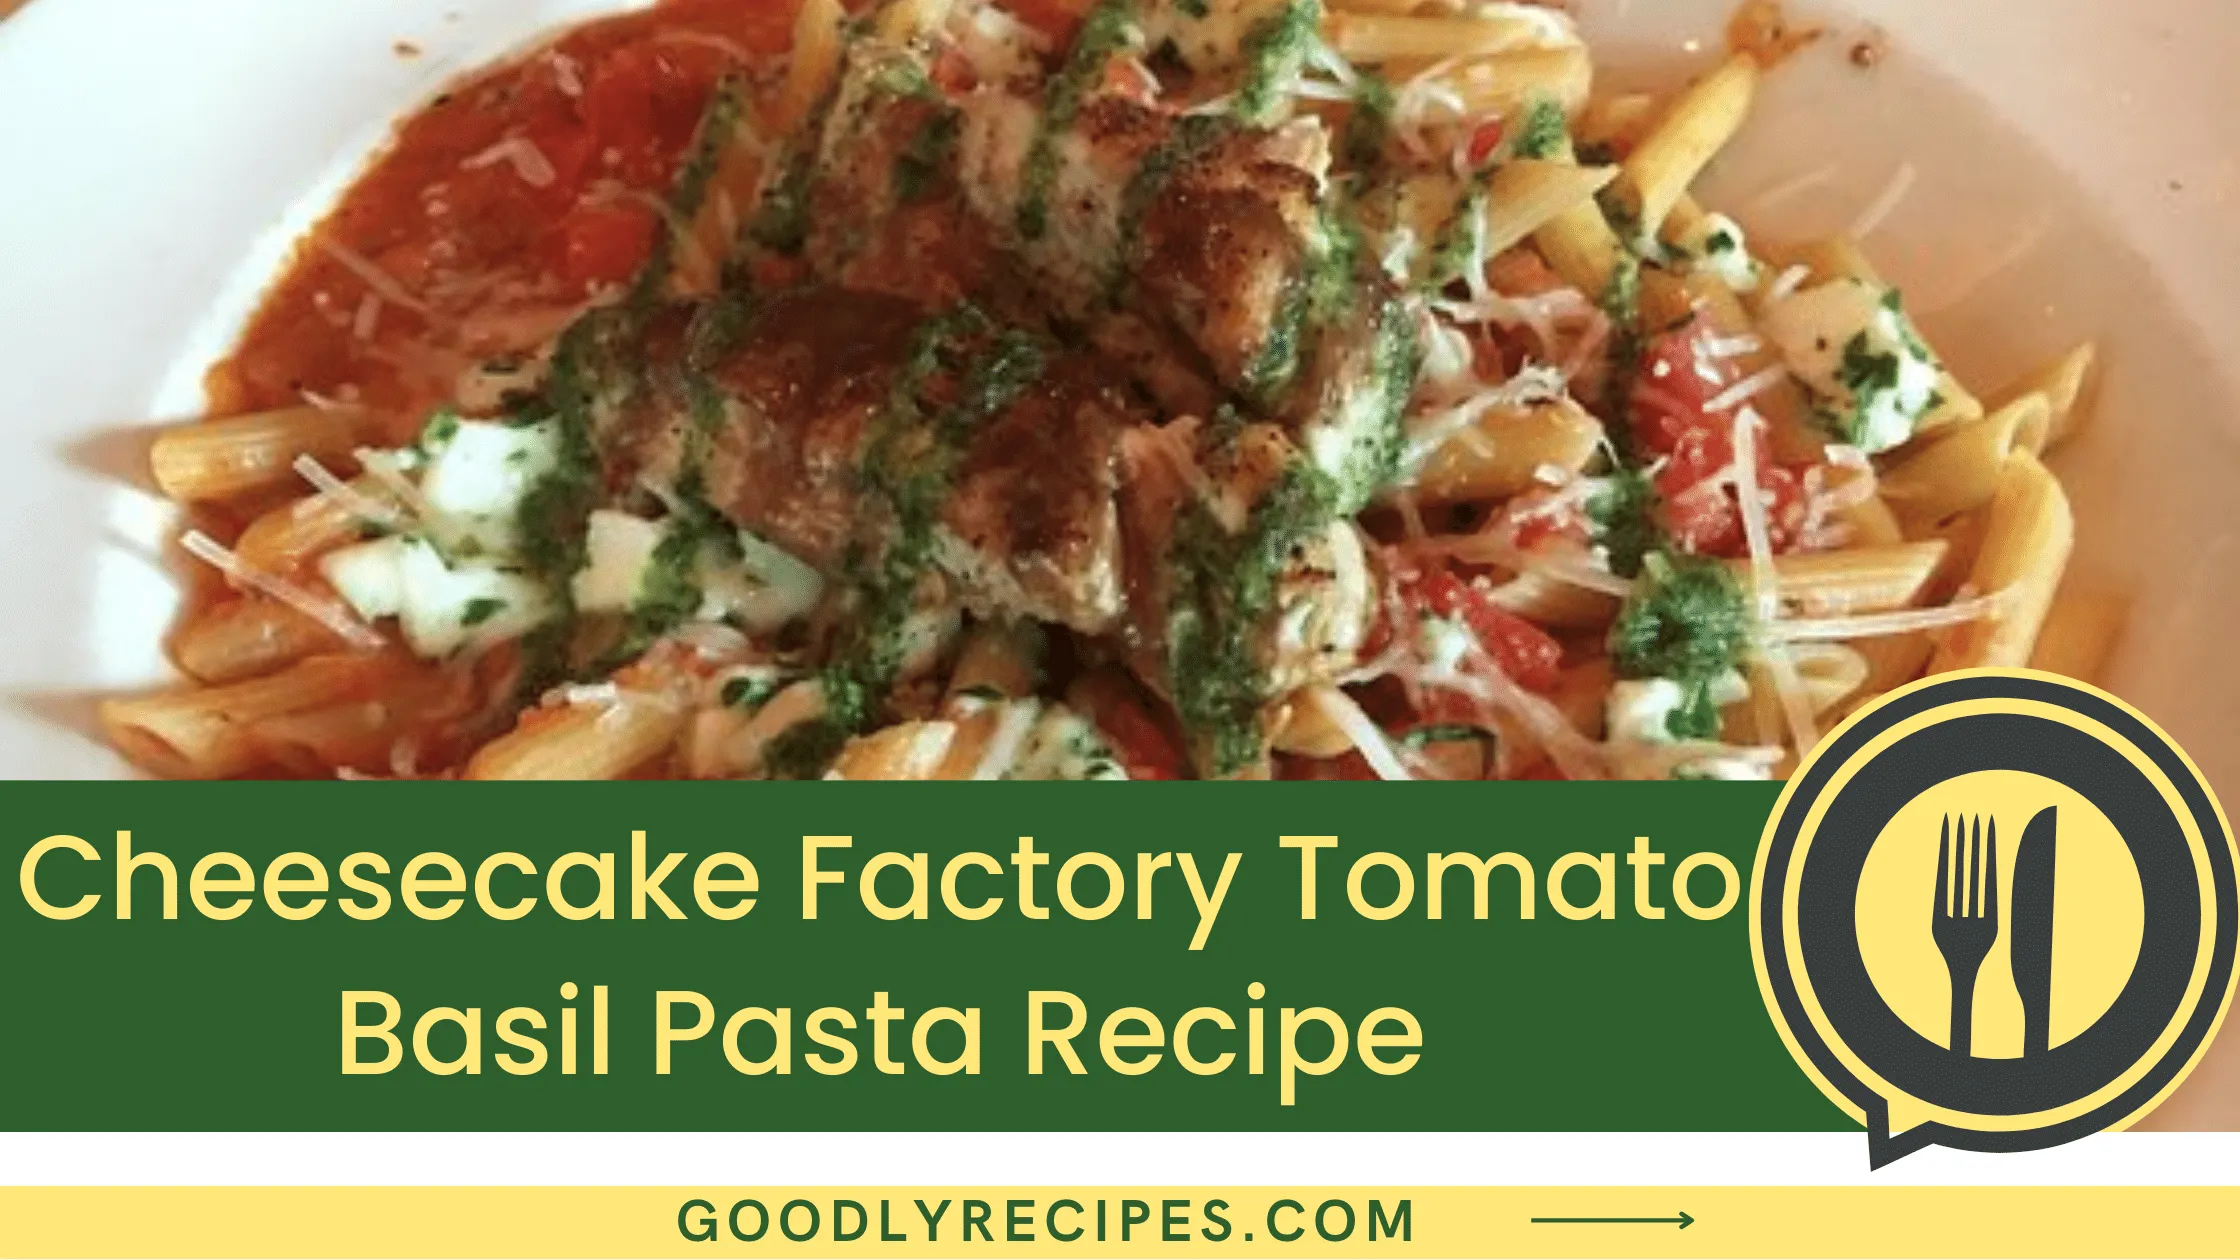 What Is Cheesecake Factory Tomato Basil Pasta?